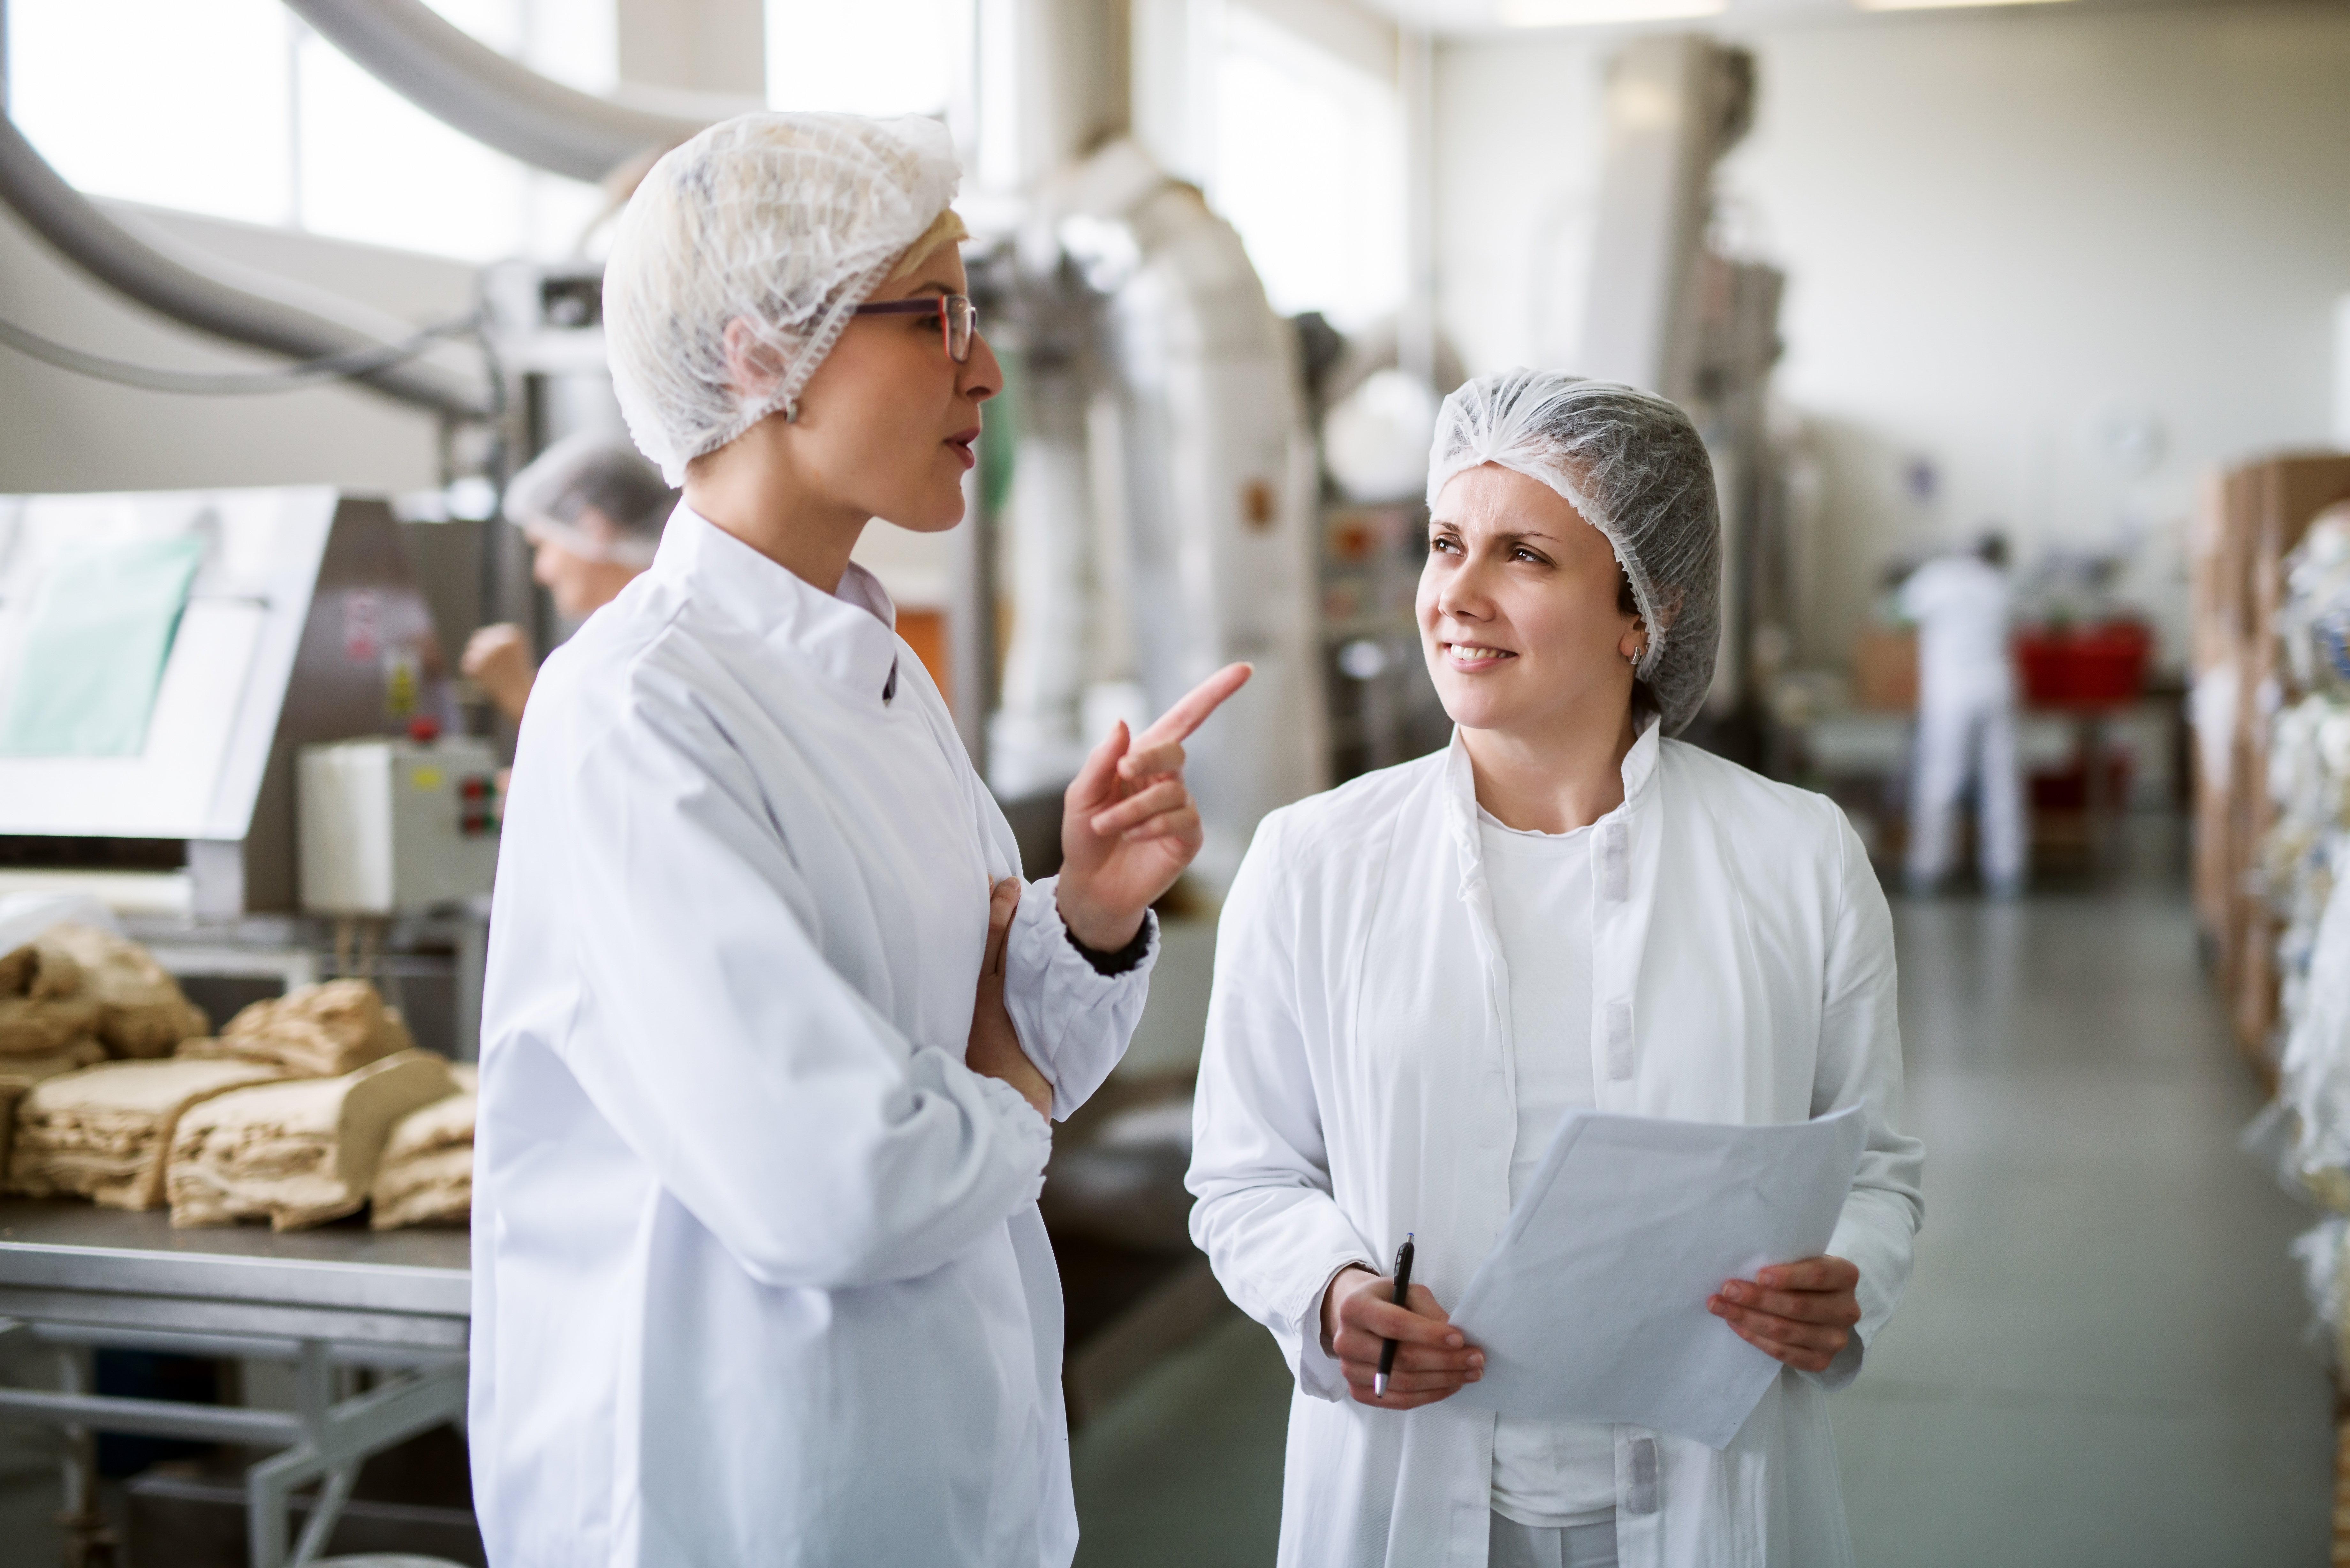 Two Food Processing Employees Discussing Food Safety Culture